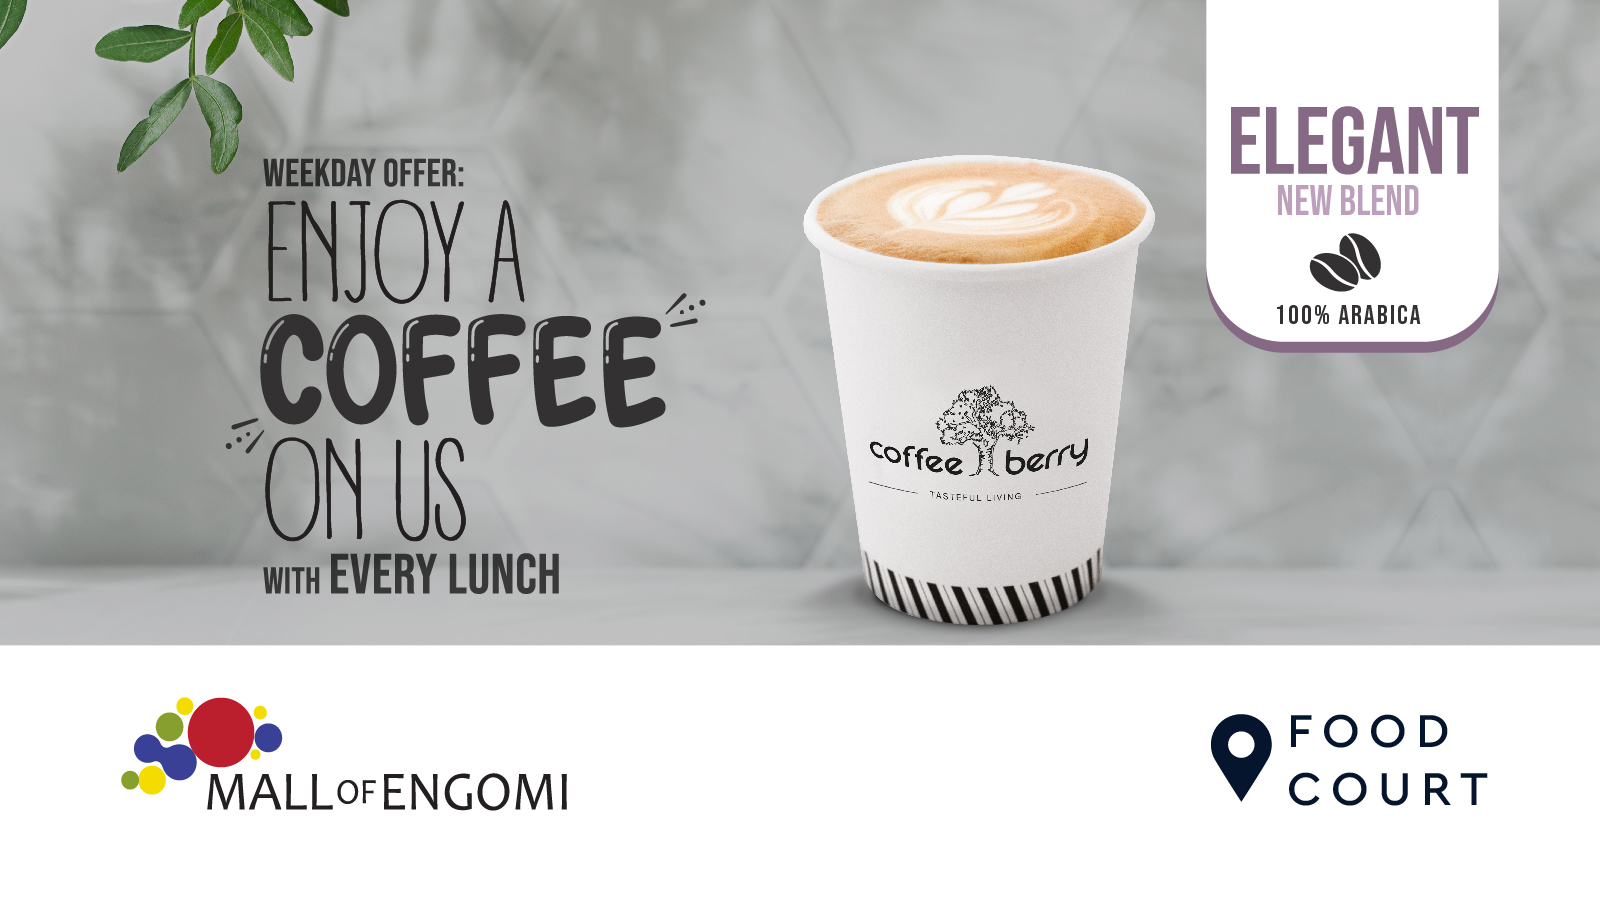 Weekday Offer: Enjoy a Coffee on Us with Every Lunch!